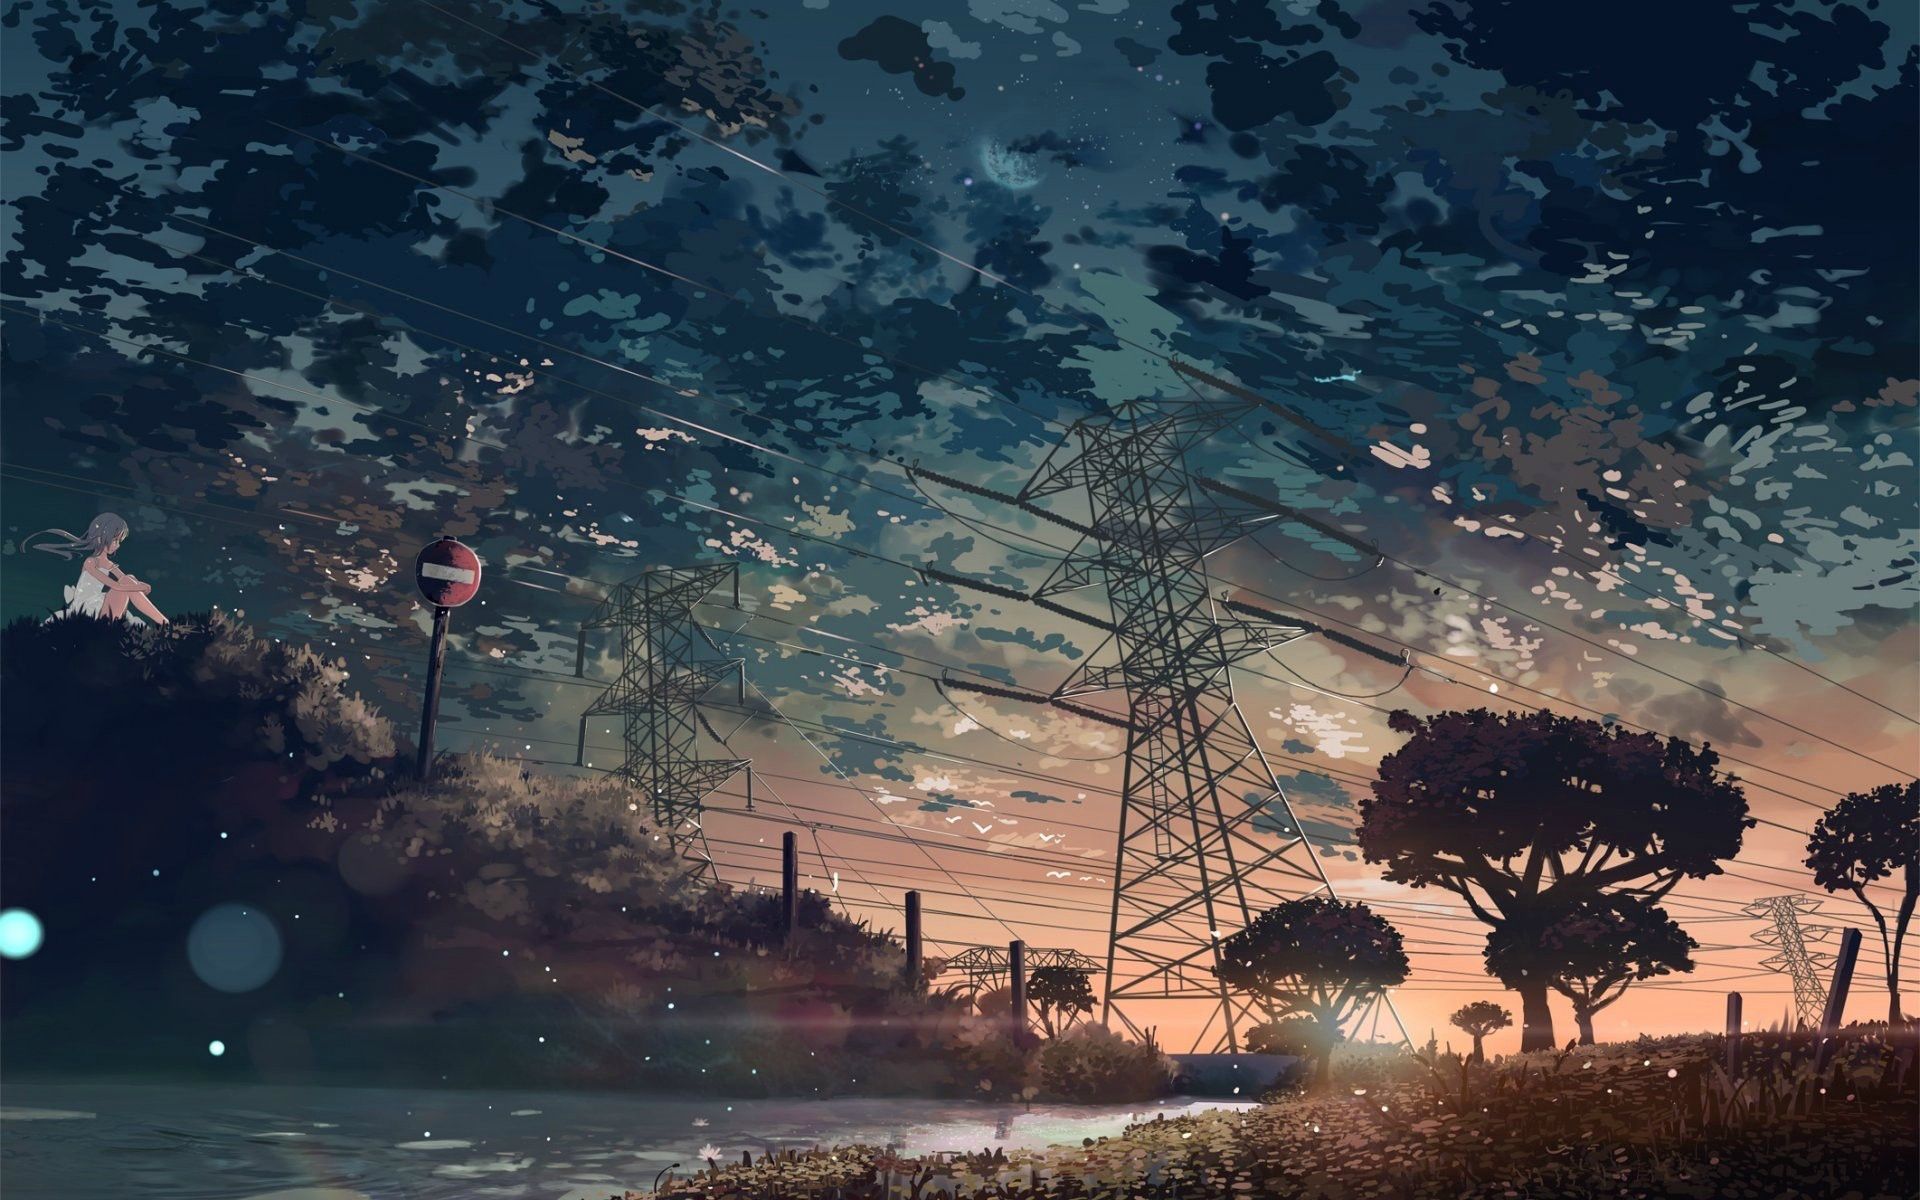 Dark Anime Scenery Wallpapers and Backgrounds 2720 - HD Wallpaper Site